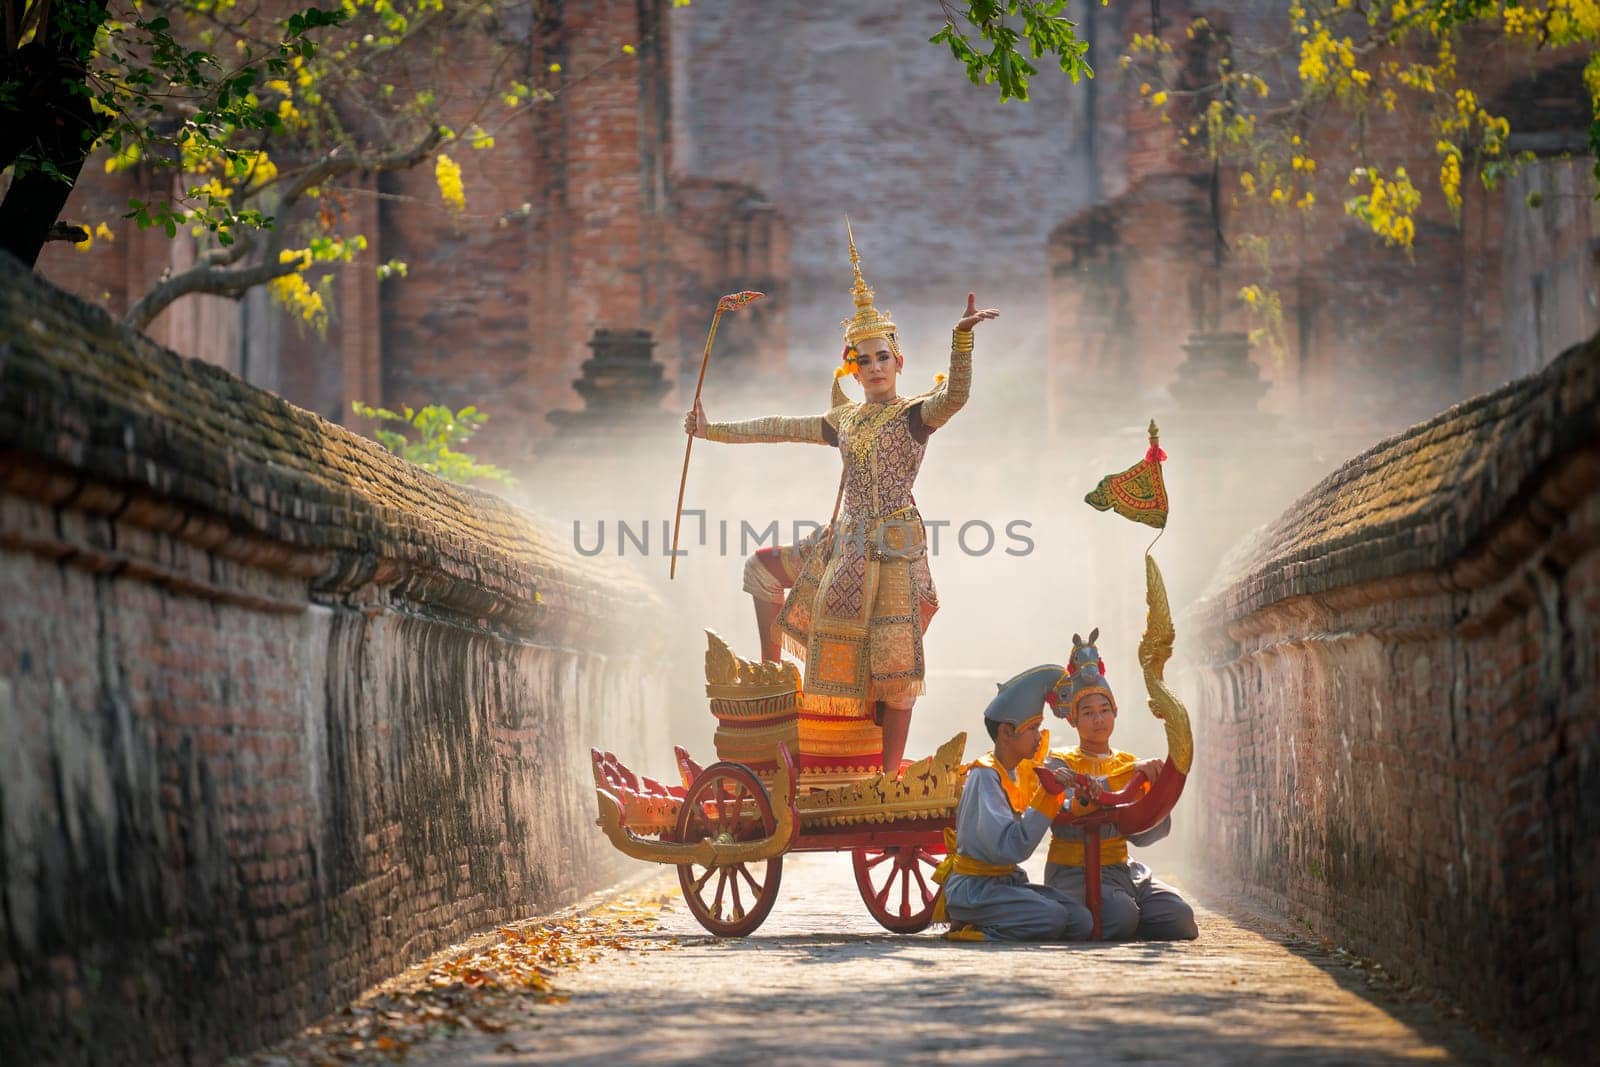 Khon or traditional Thai classic masked from the Ramakien as character of princess or king dance on traditional chariot in front of ancient building with mist or fog.